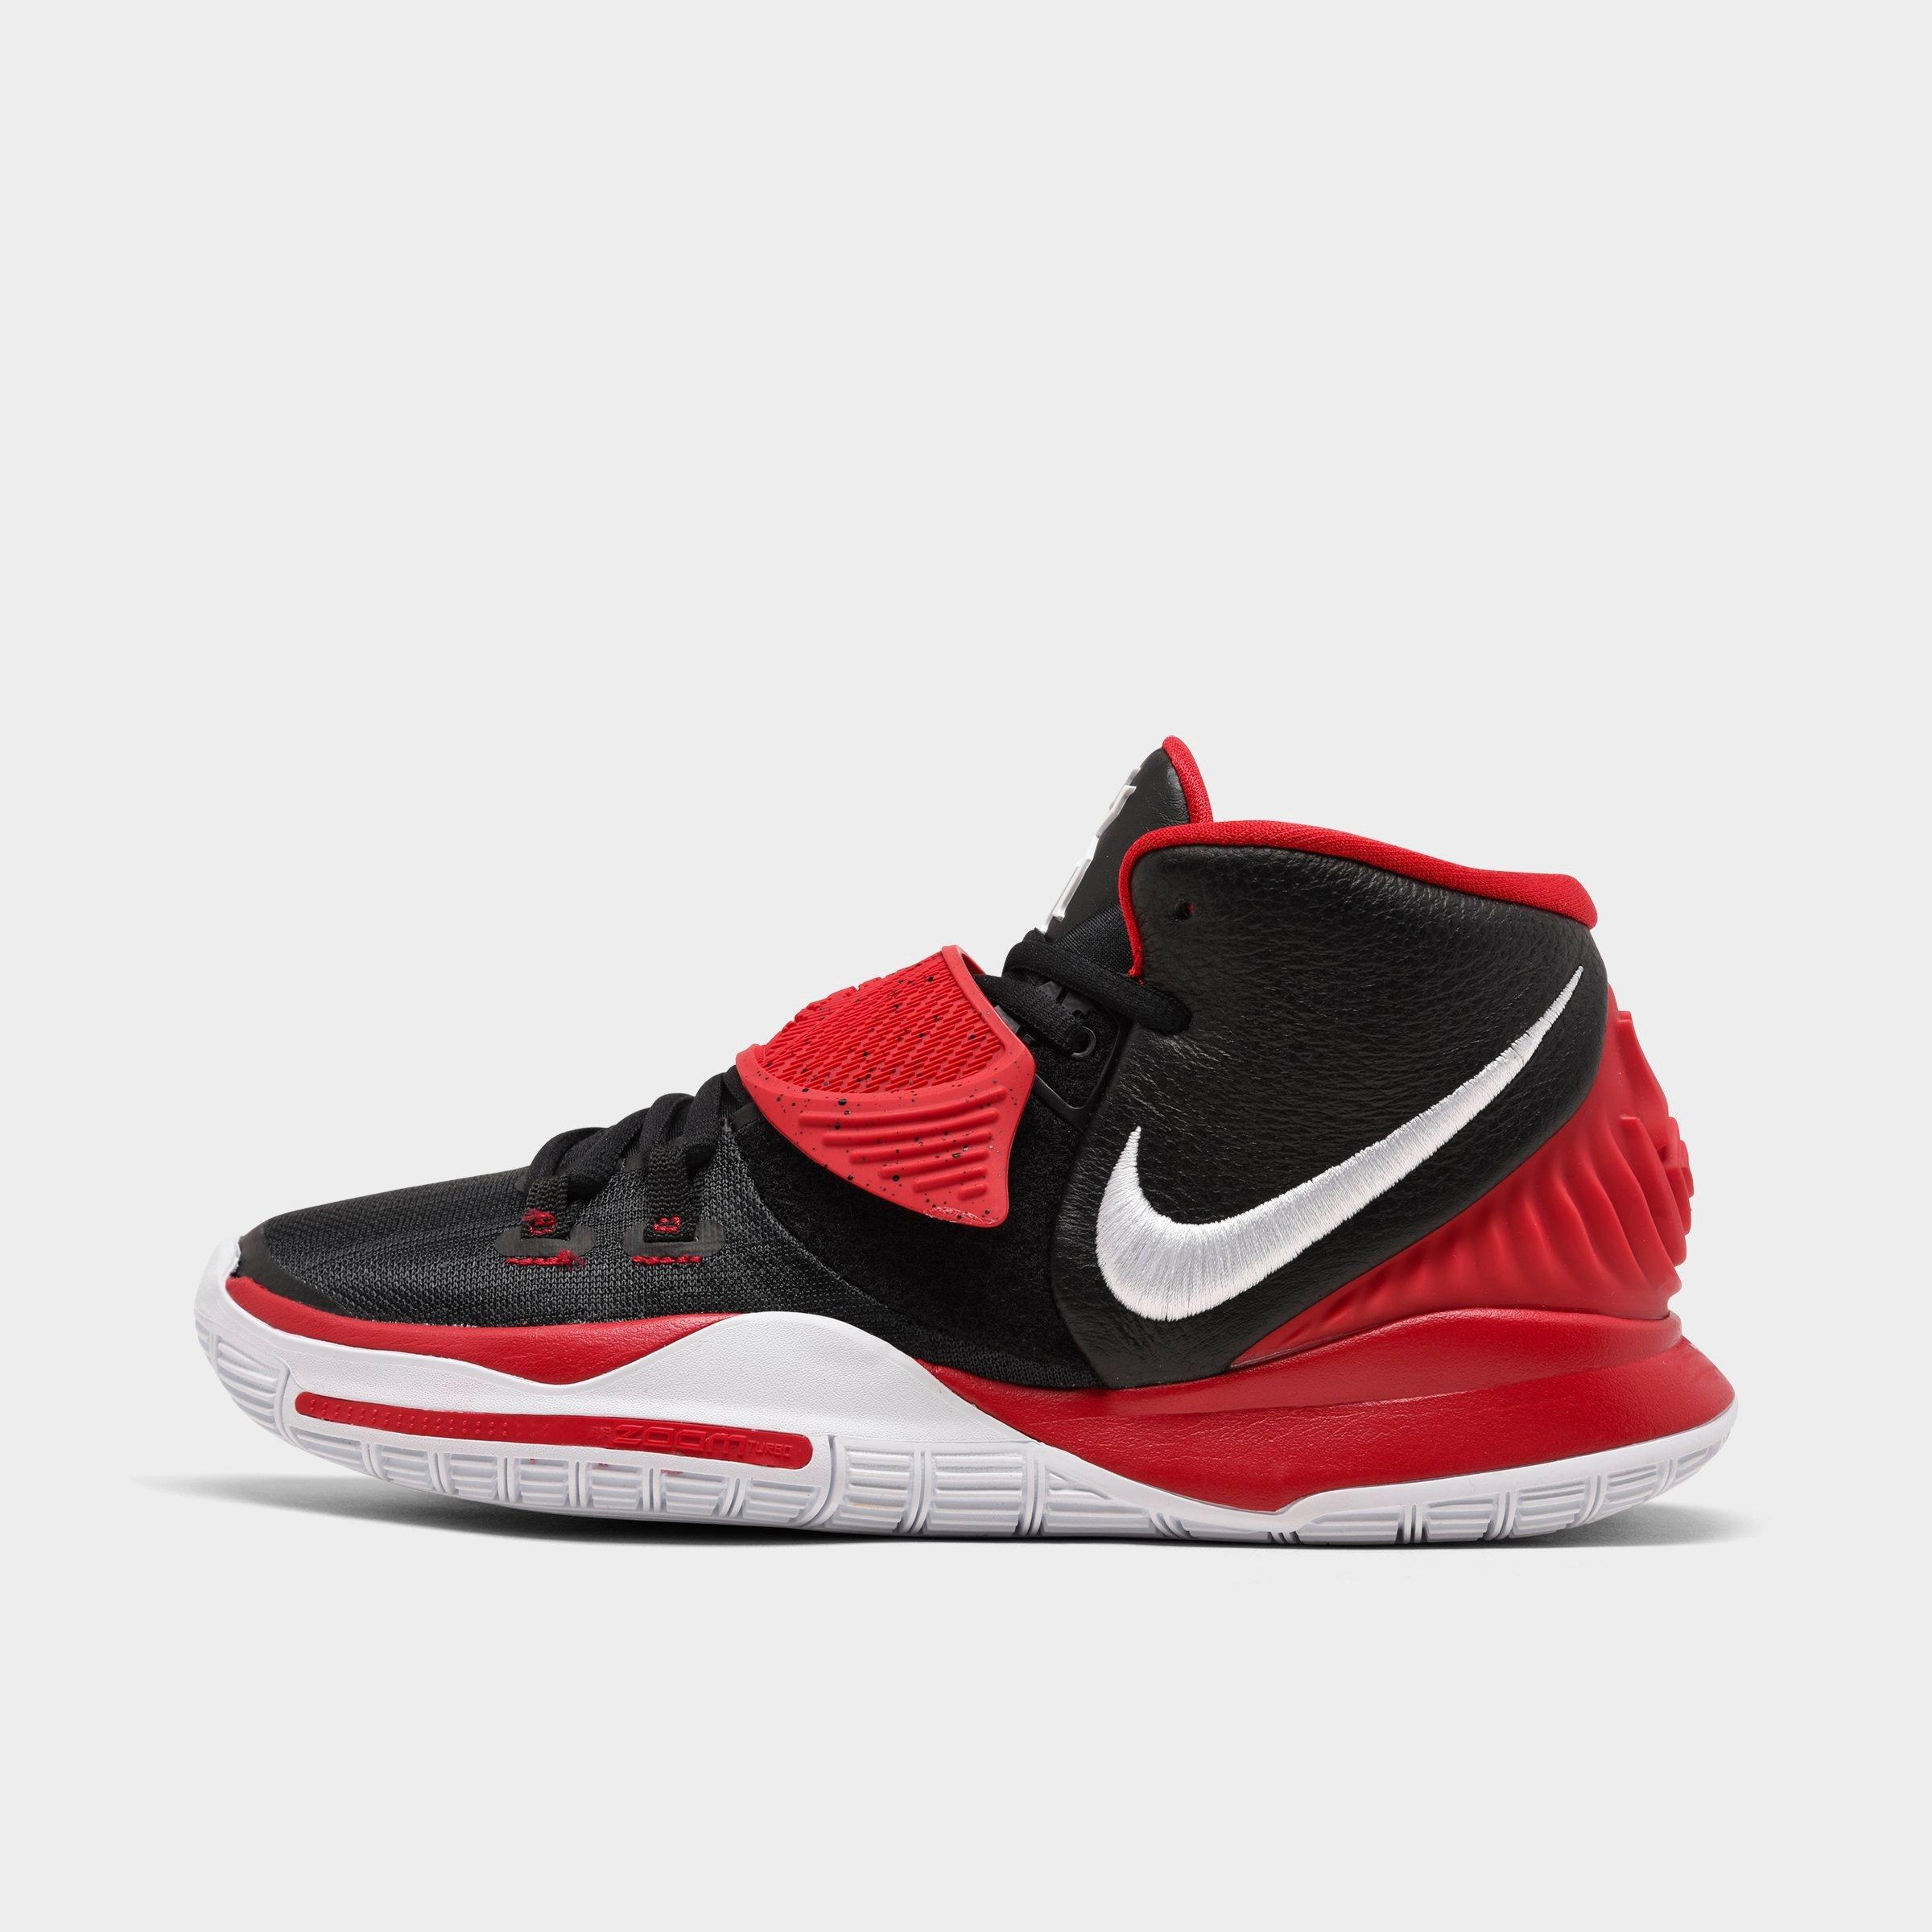 kyrie irving women's shoes